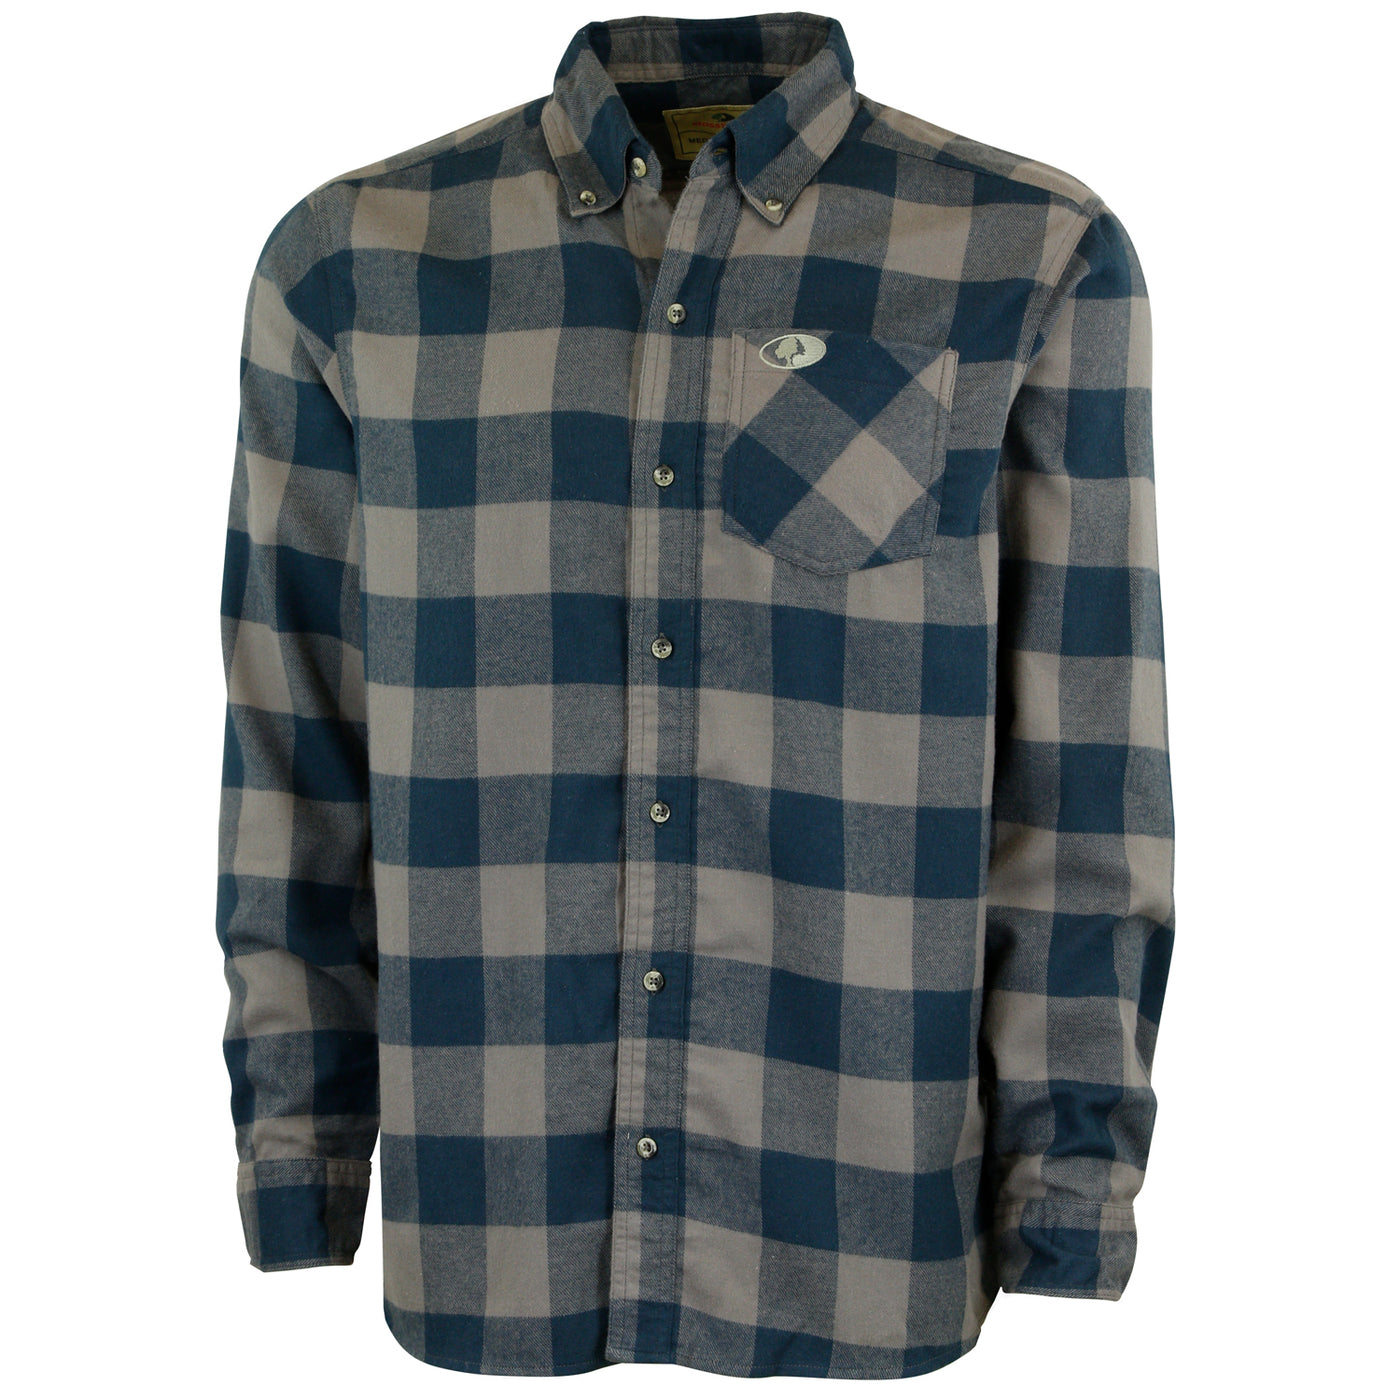 Mossy Oak Men's Thermal Lined Plaid Flannel Shirt